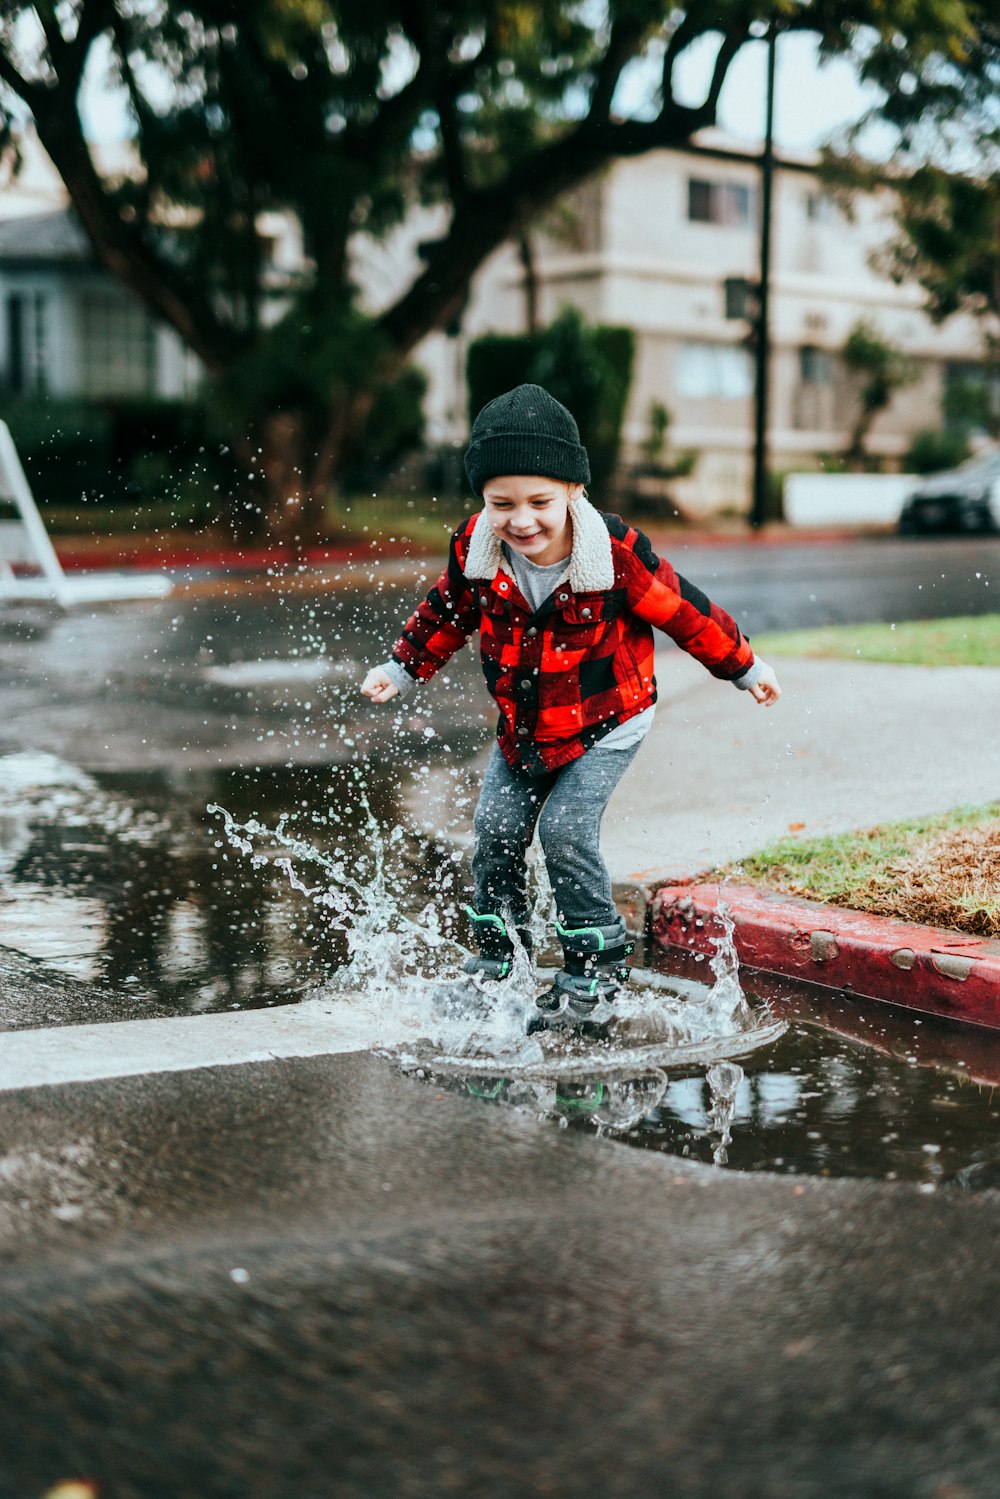 boy in red and black jacket and black knit cap running on wet road during daytime